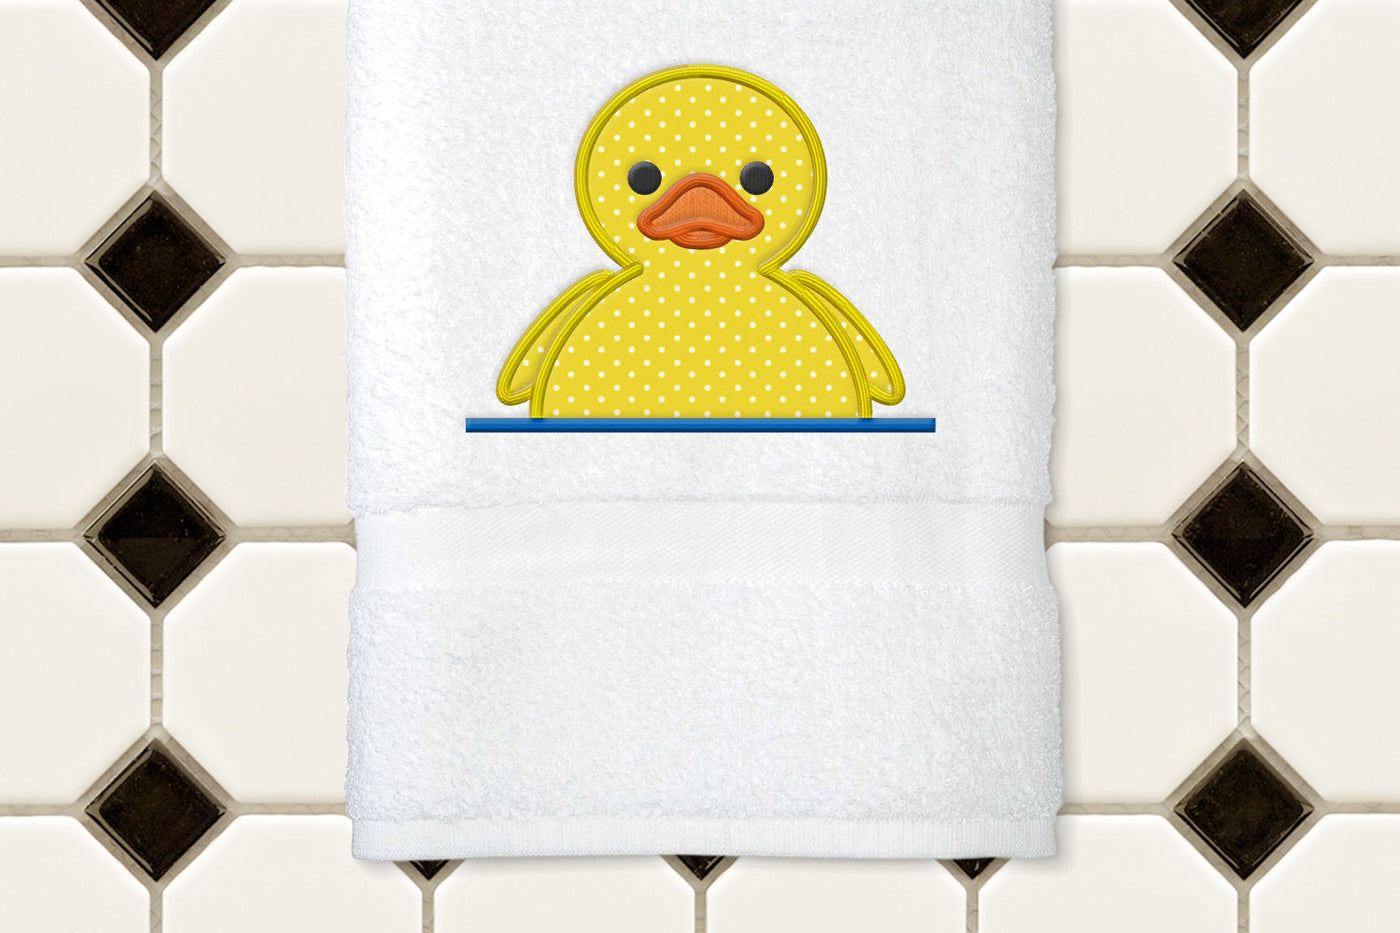 Rubber duck front applique embroidery design with bottom split line